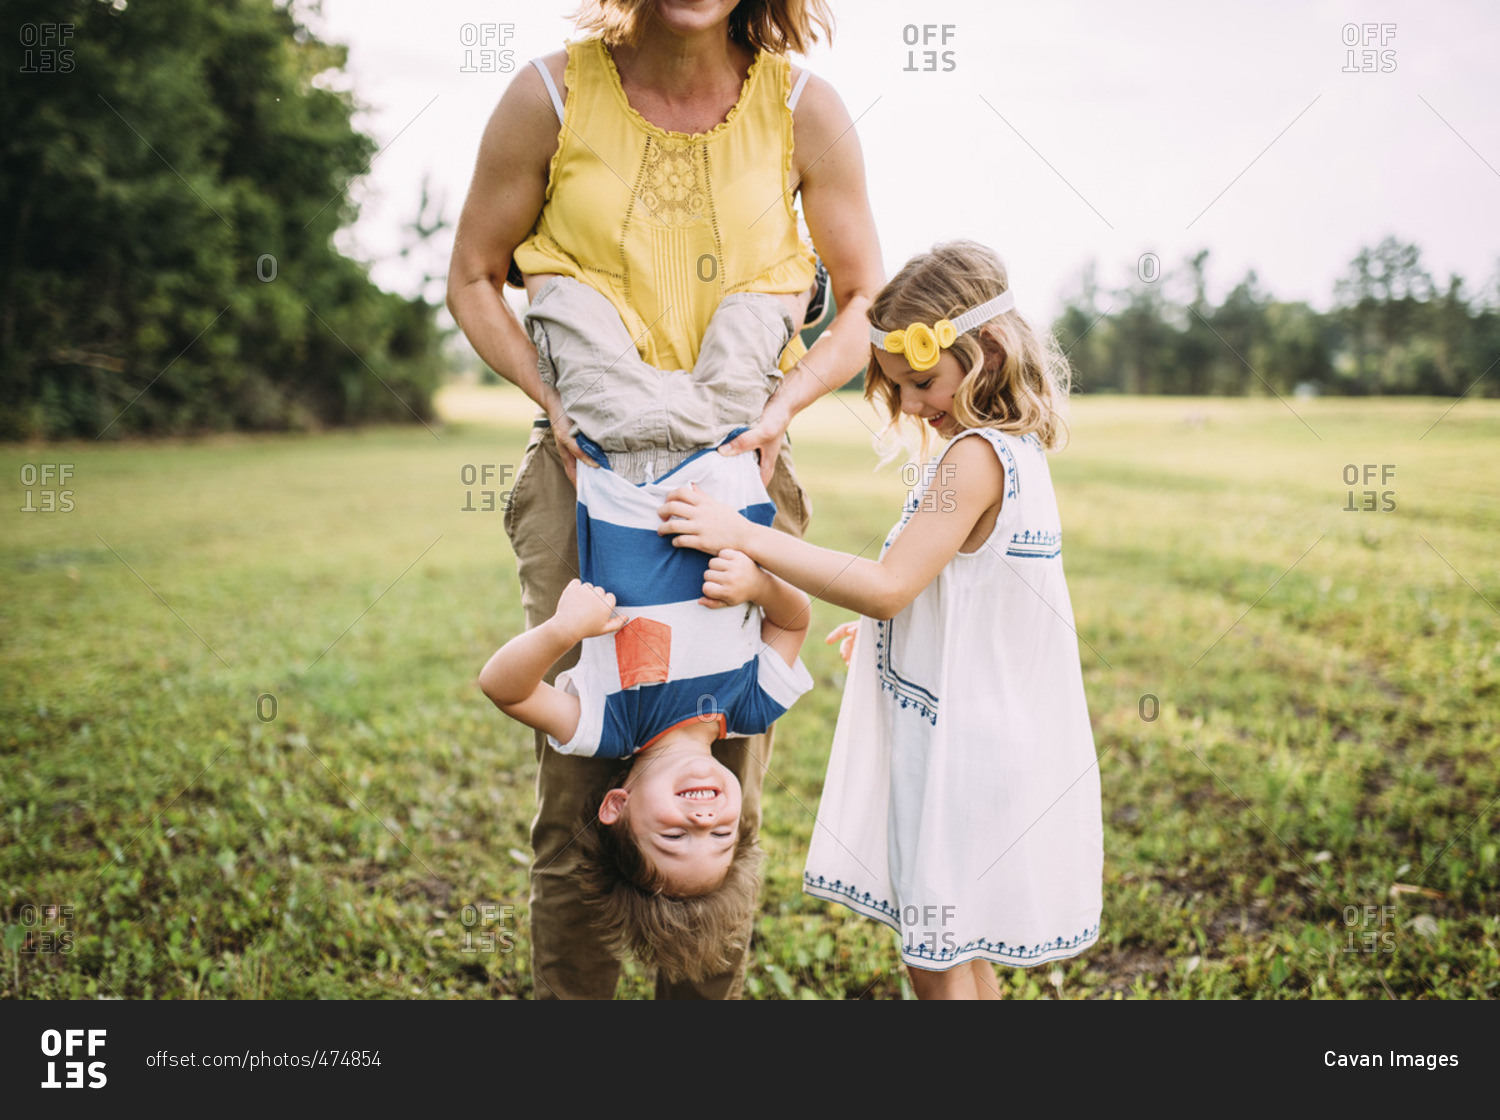 Low section of mother carrying son upside down while standing with daughter at park